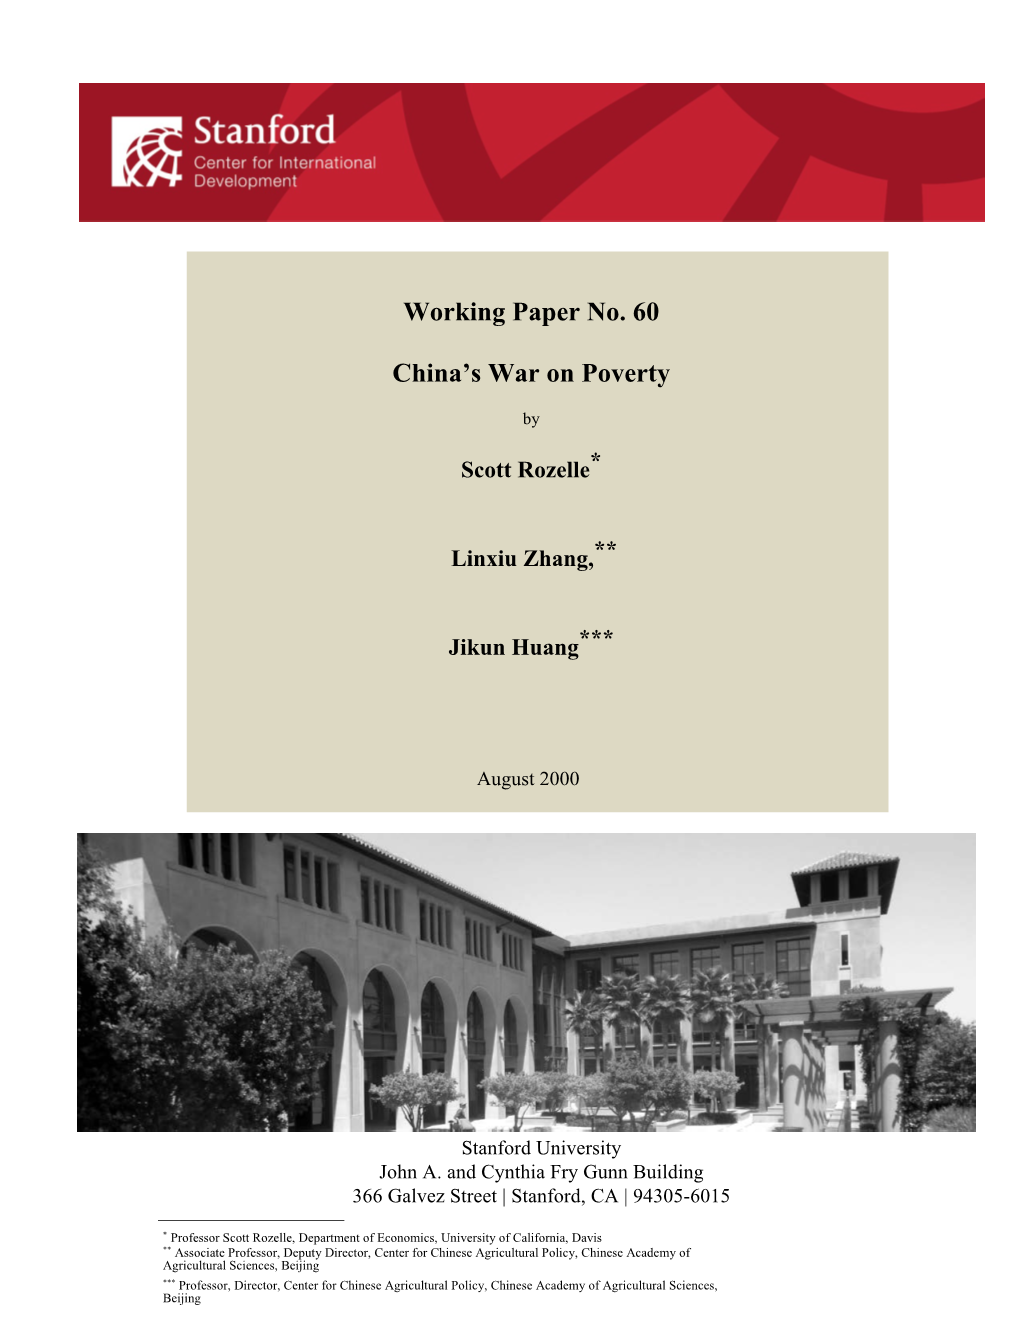 Working Paper No. 60 China's War on Poverty